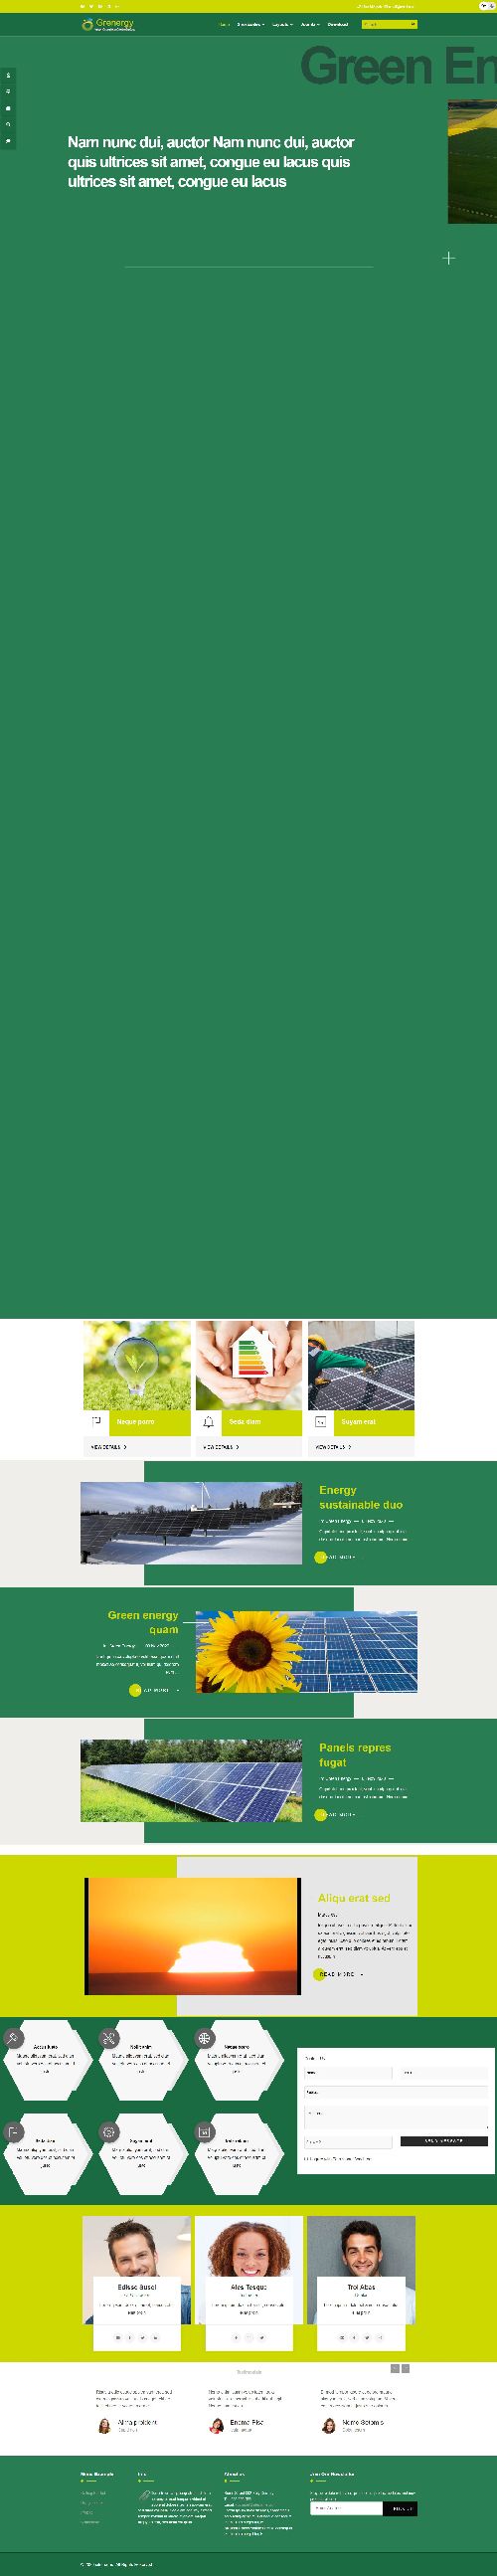 Ol Grenergy - Joomla 4 Template for Ecological Project Site